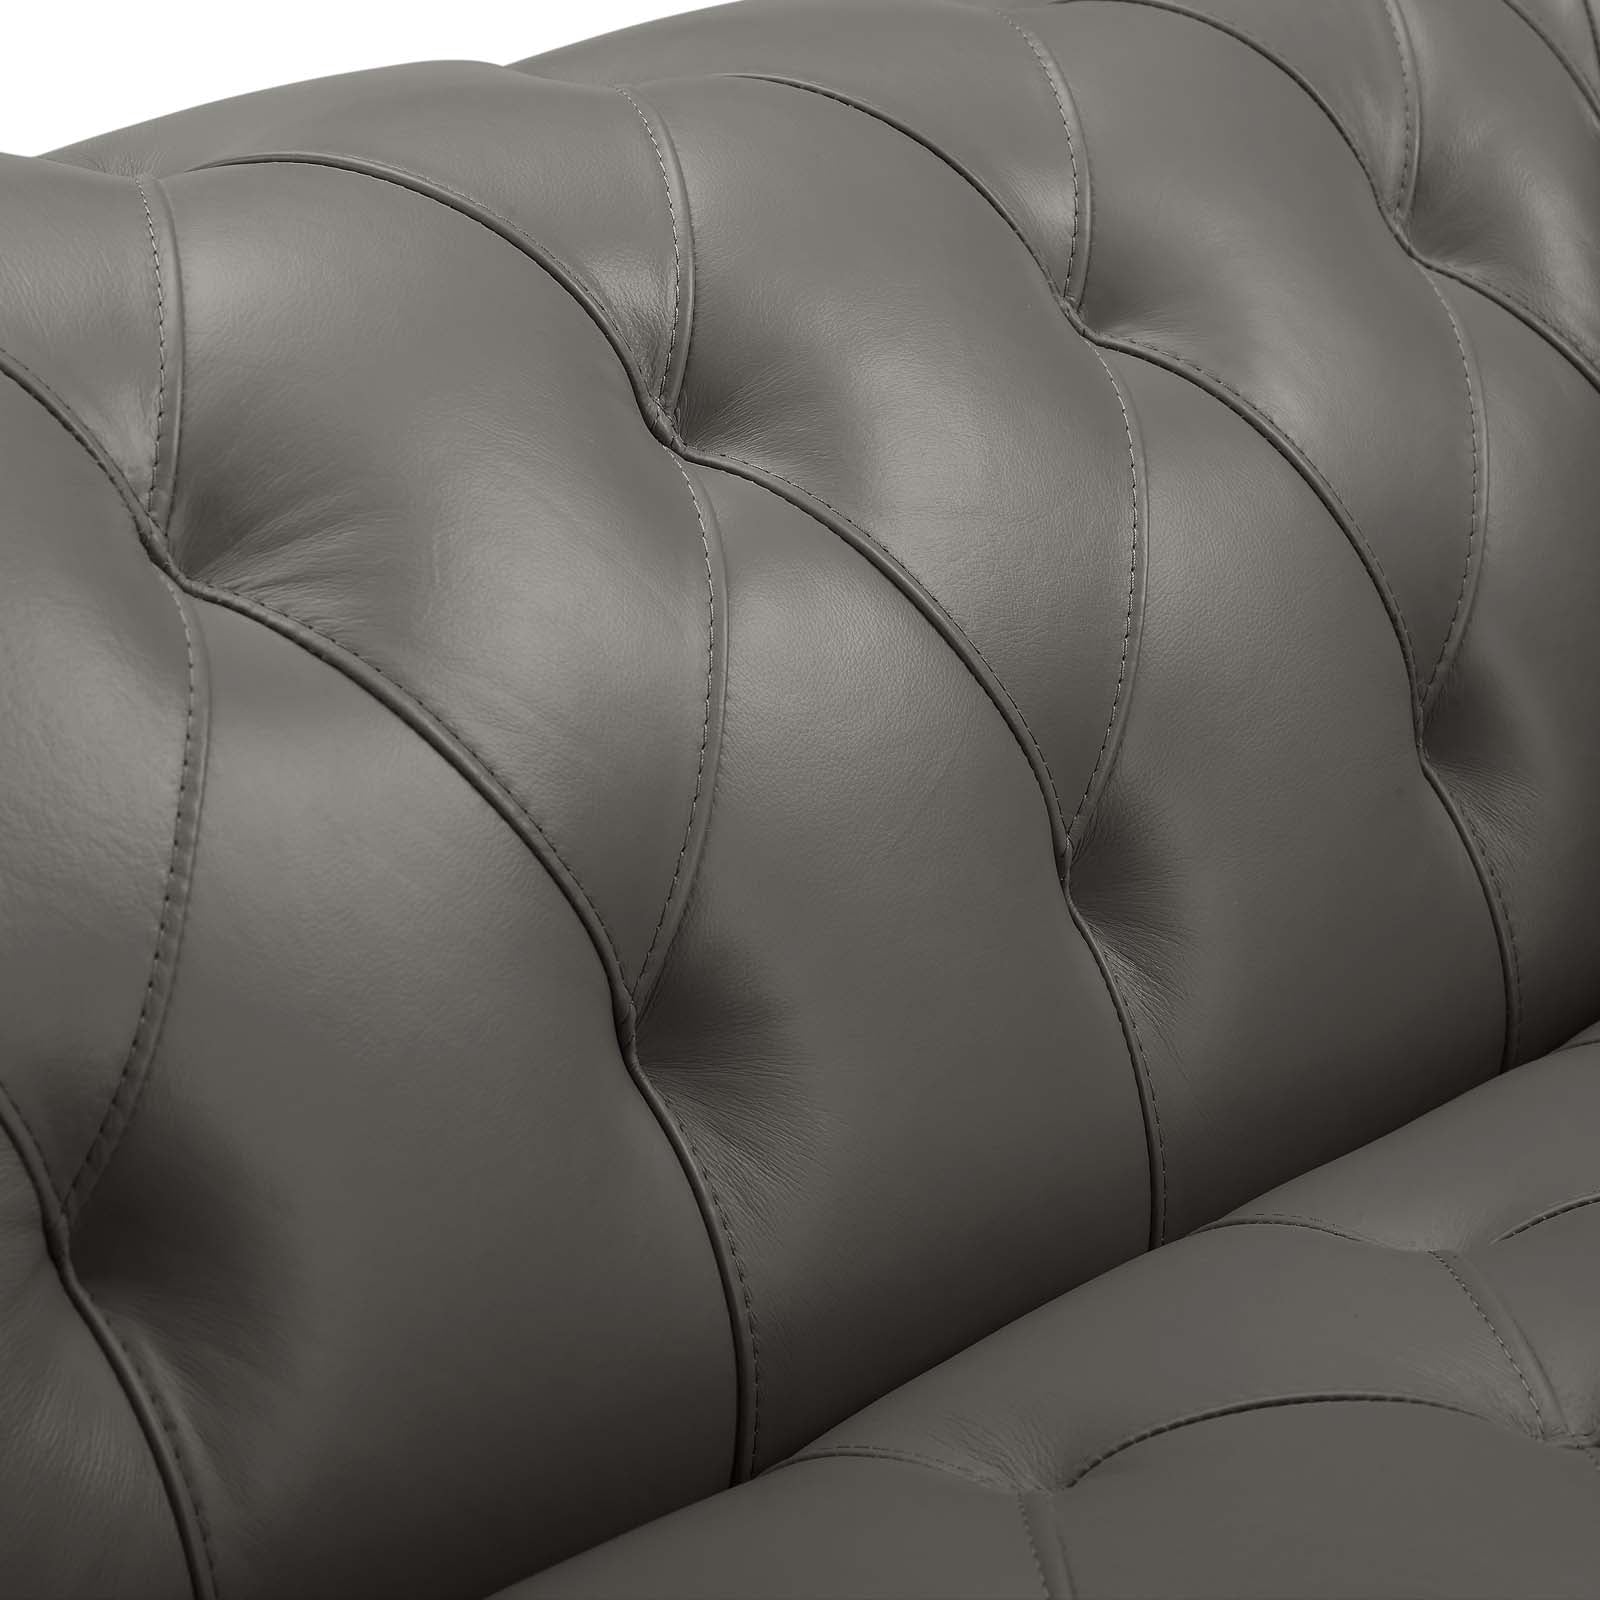 Idyll Tan Tufted Button Upholstered Leather Chesterfield Sofa